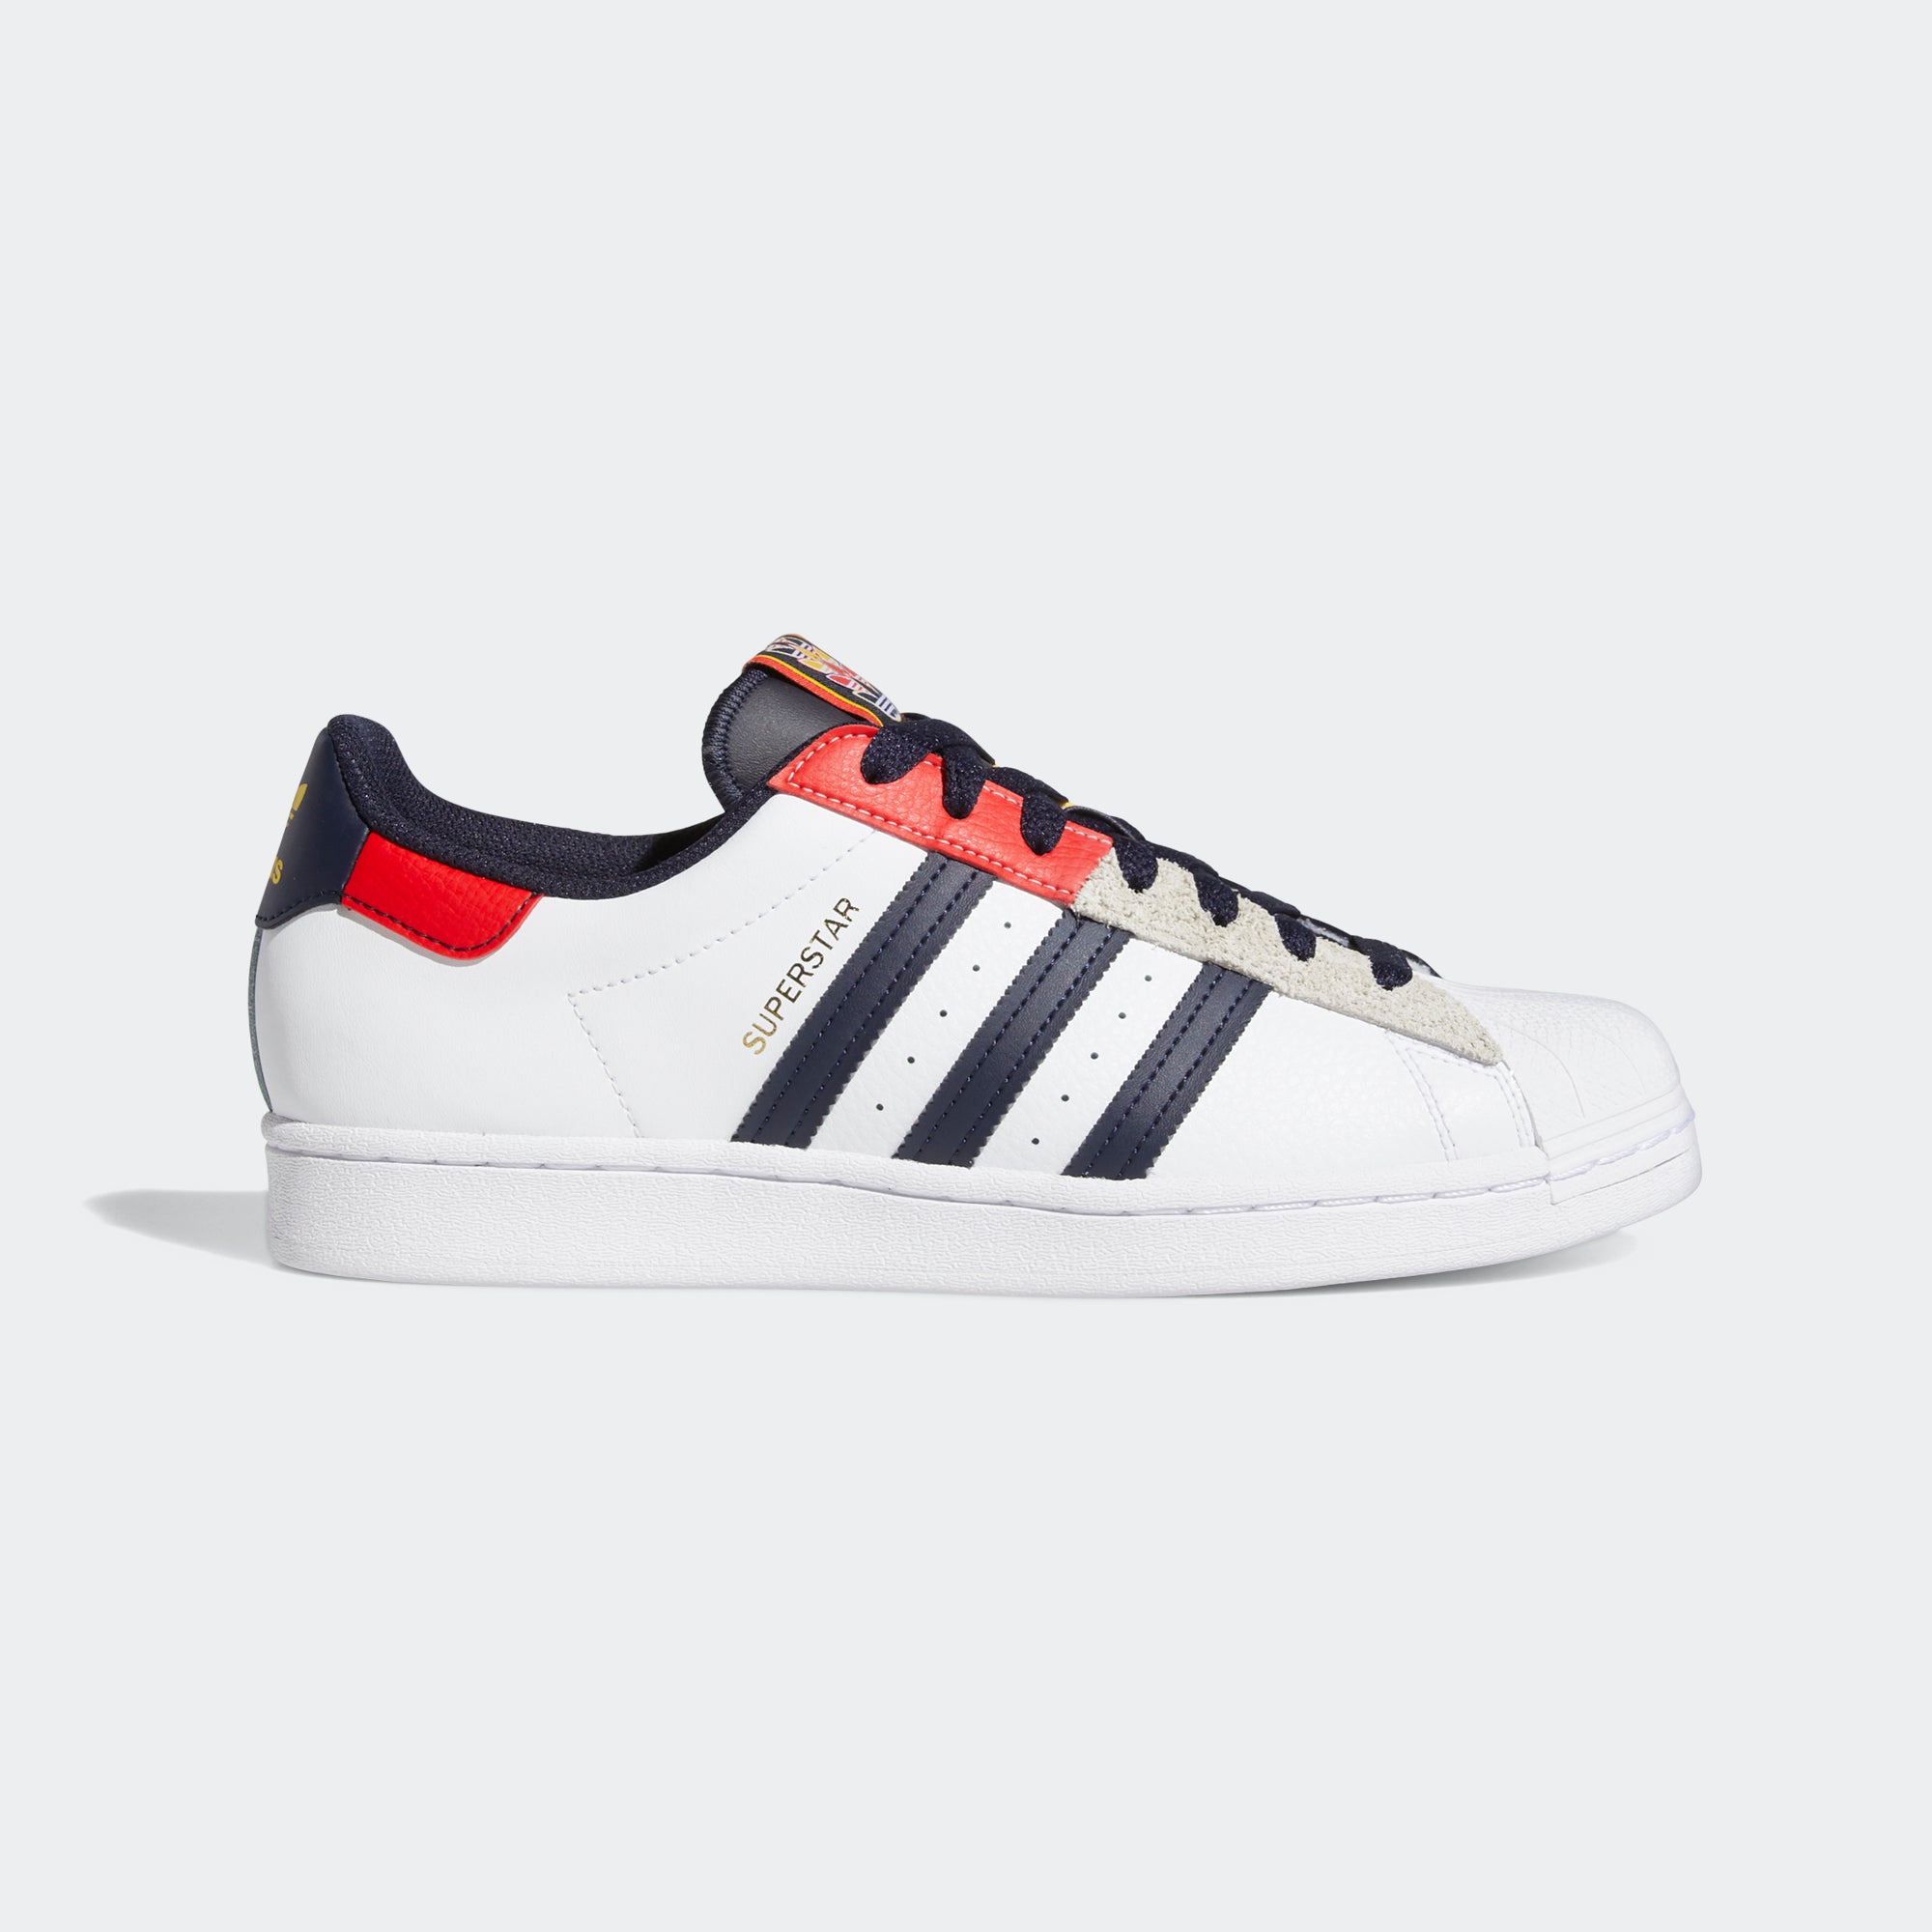 adidas Superstar Legend Ink Cloud White Gold - GY5793 - US